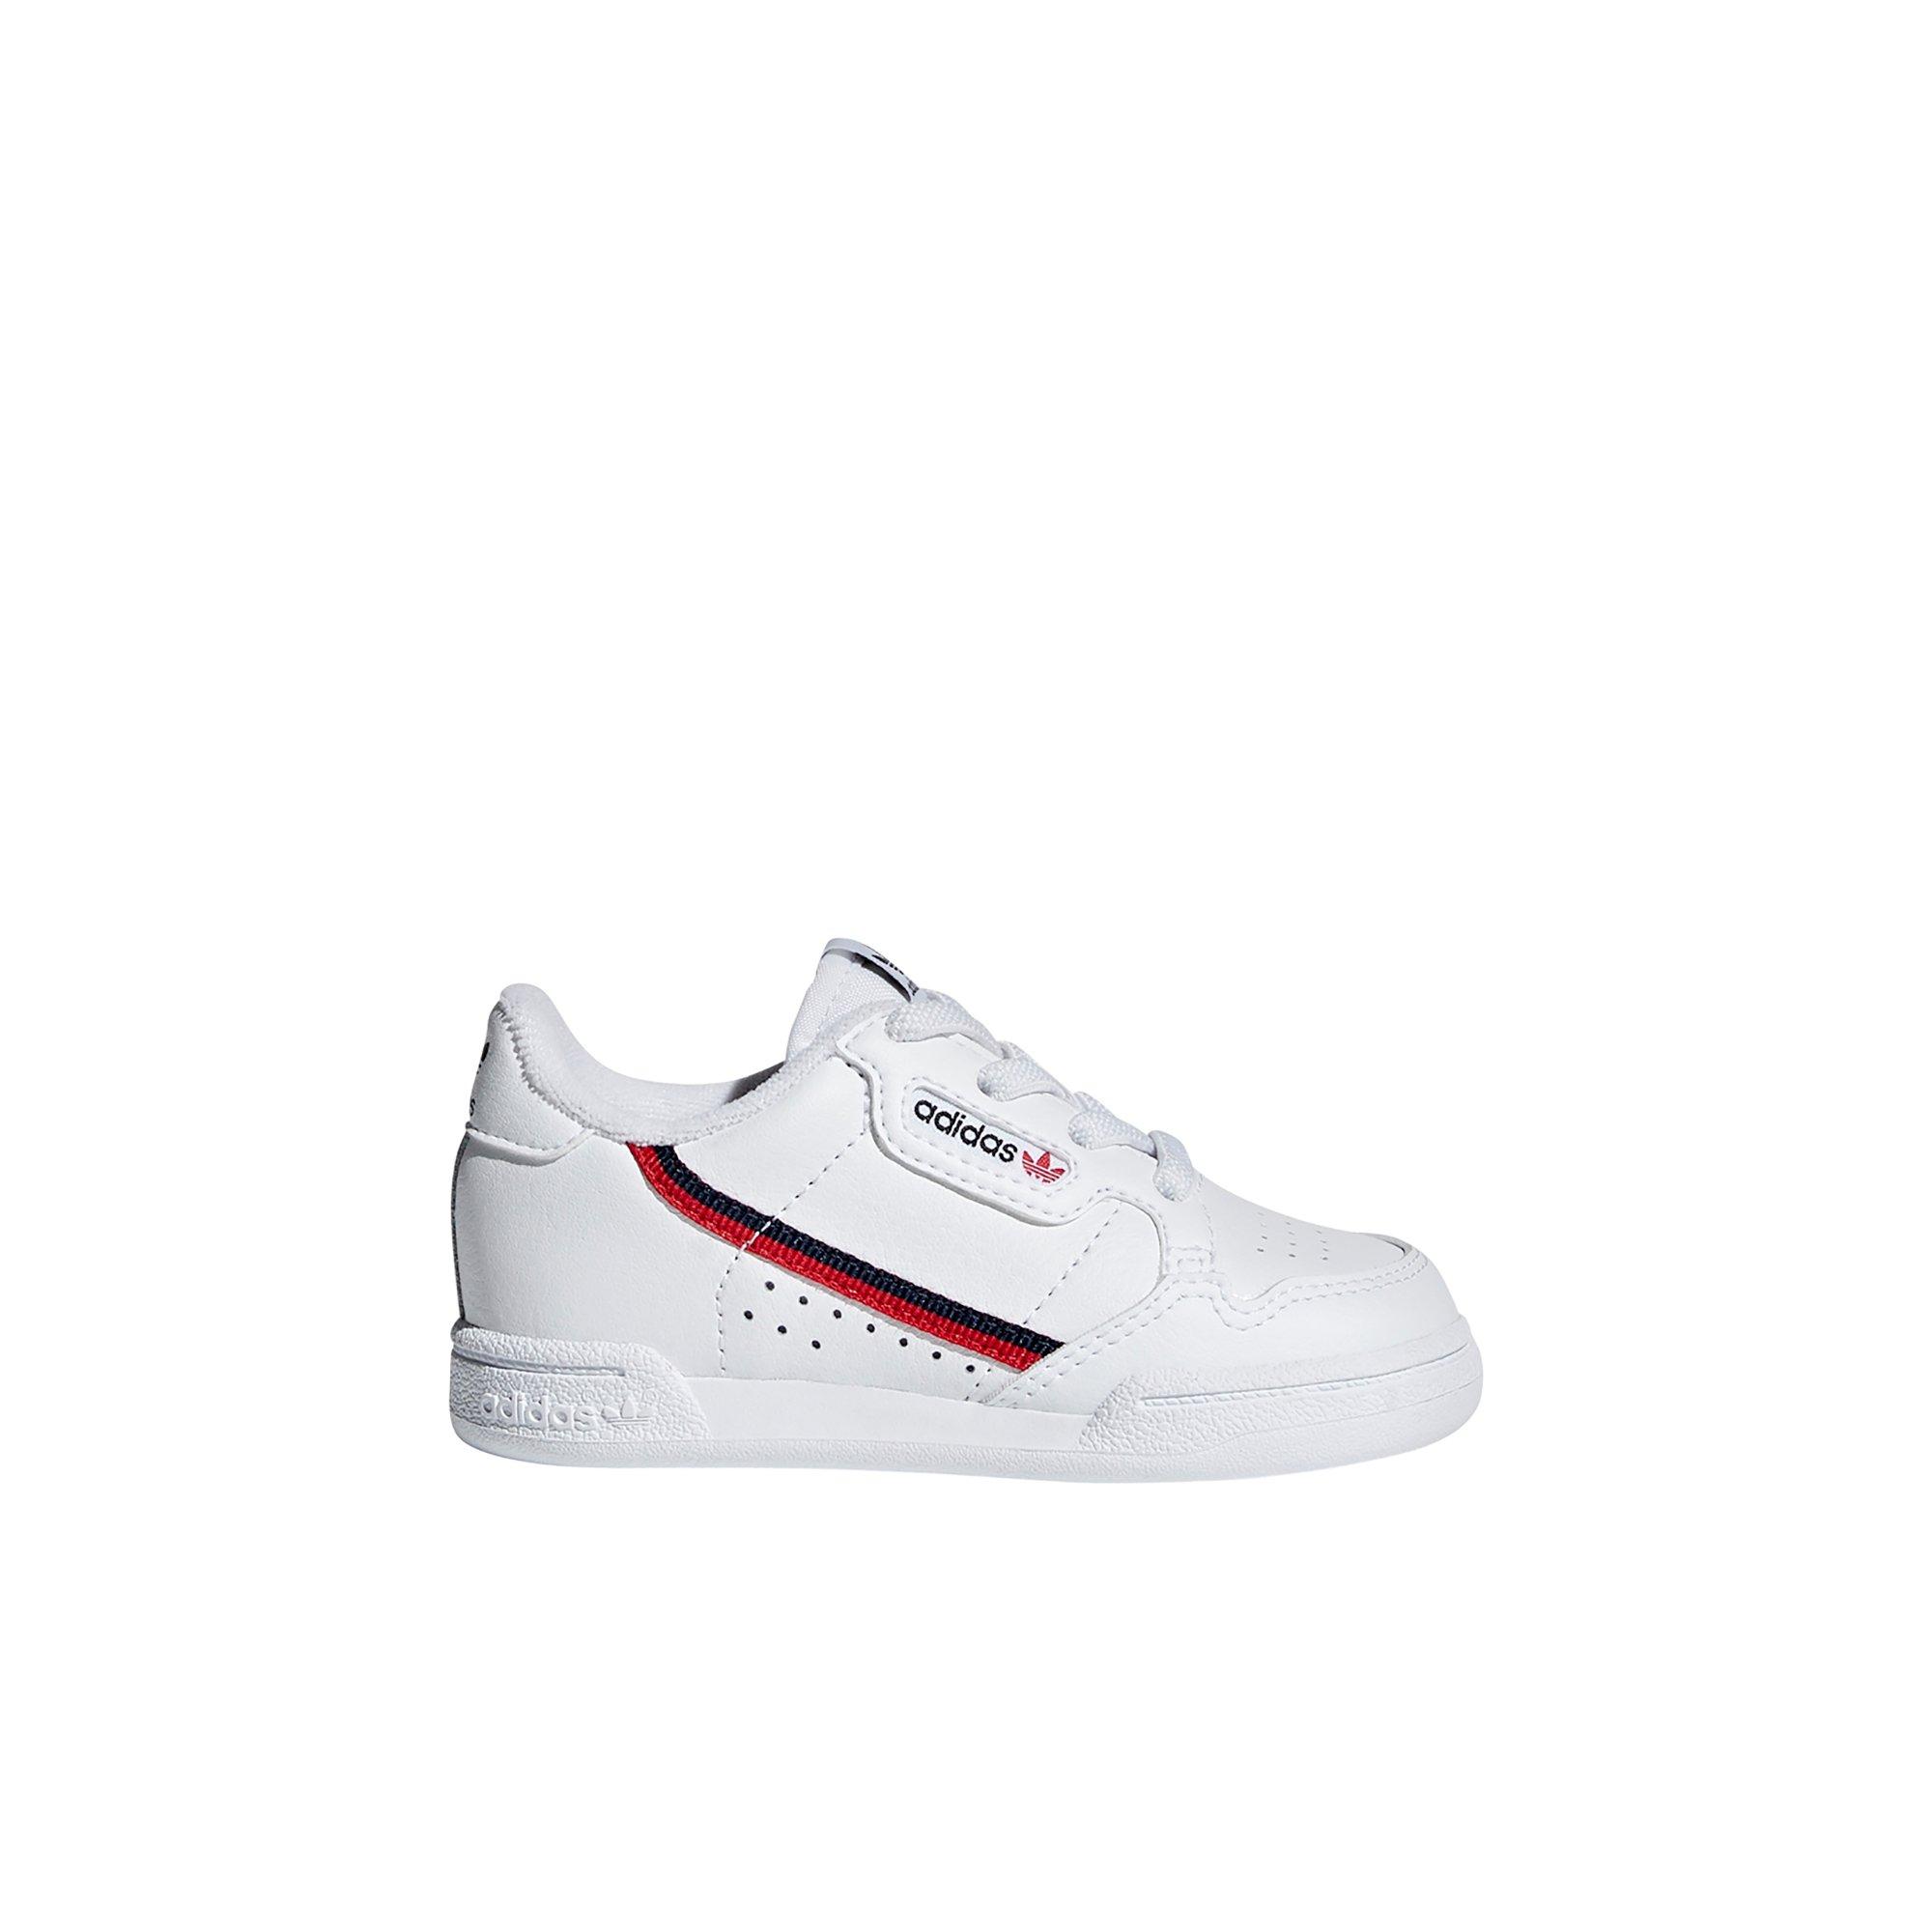 adidas continental for kids